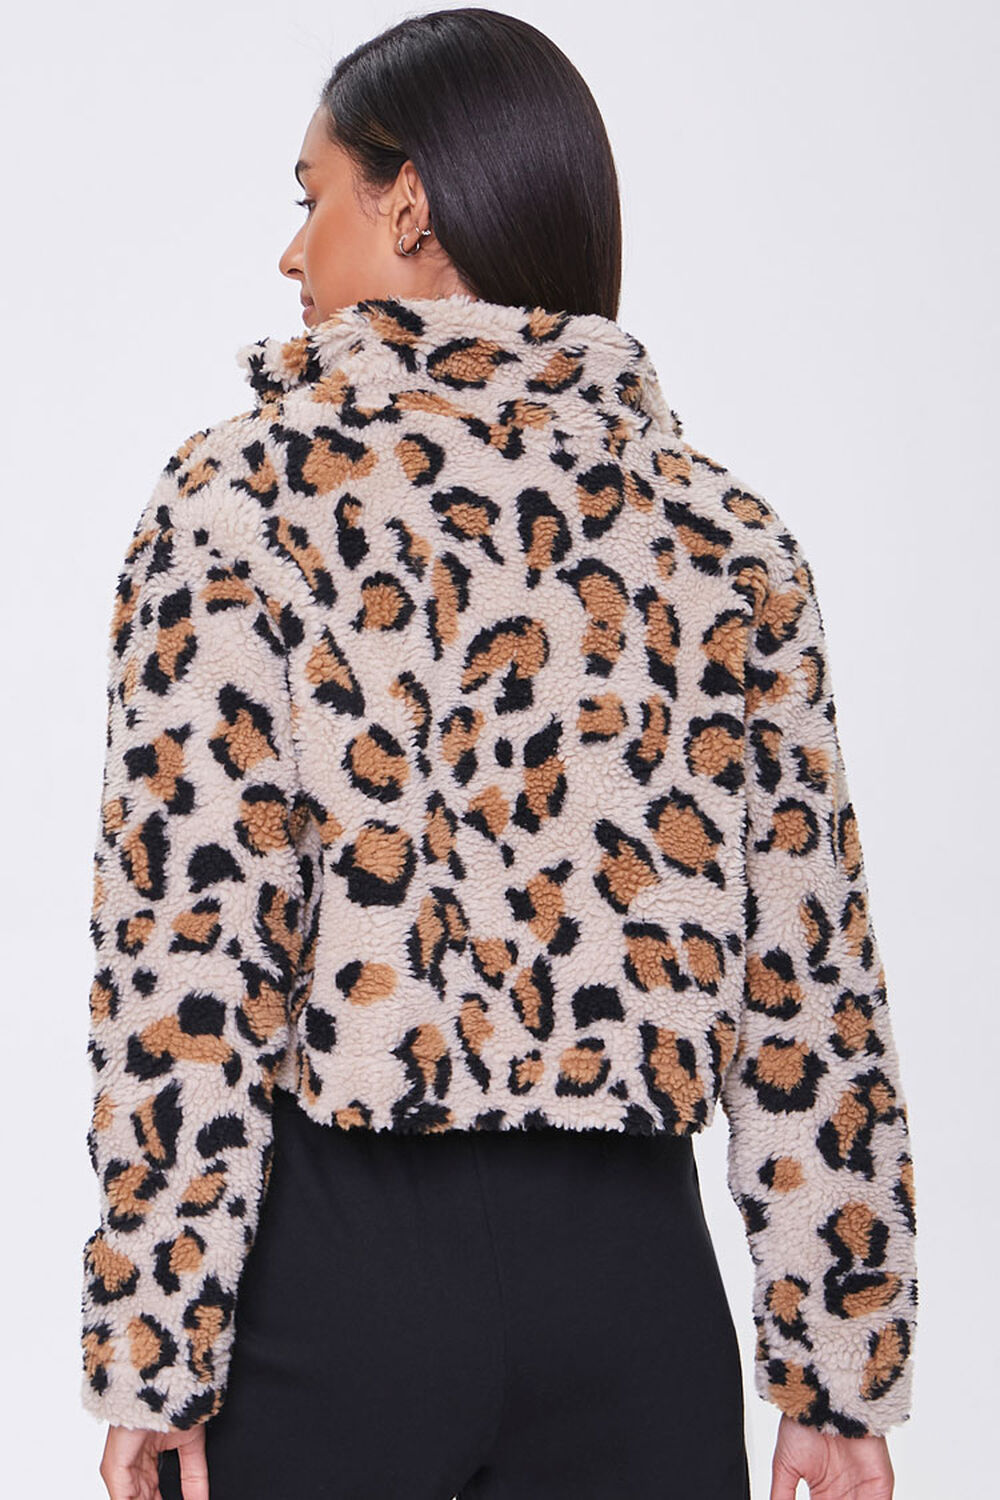 TAUPE/MULTI Faux Shearling Leopard Print Jacket, image 3